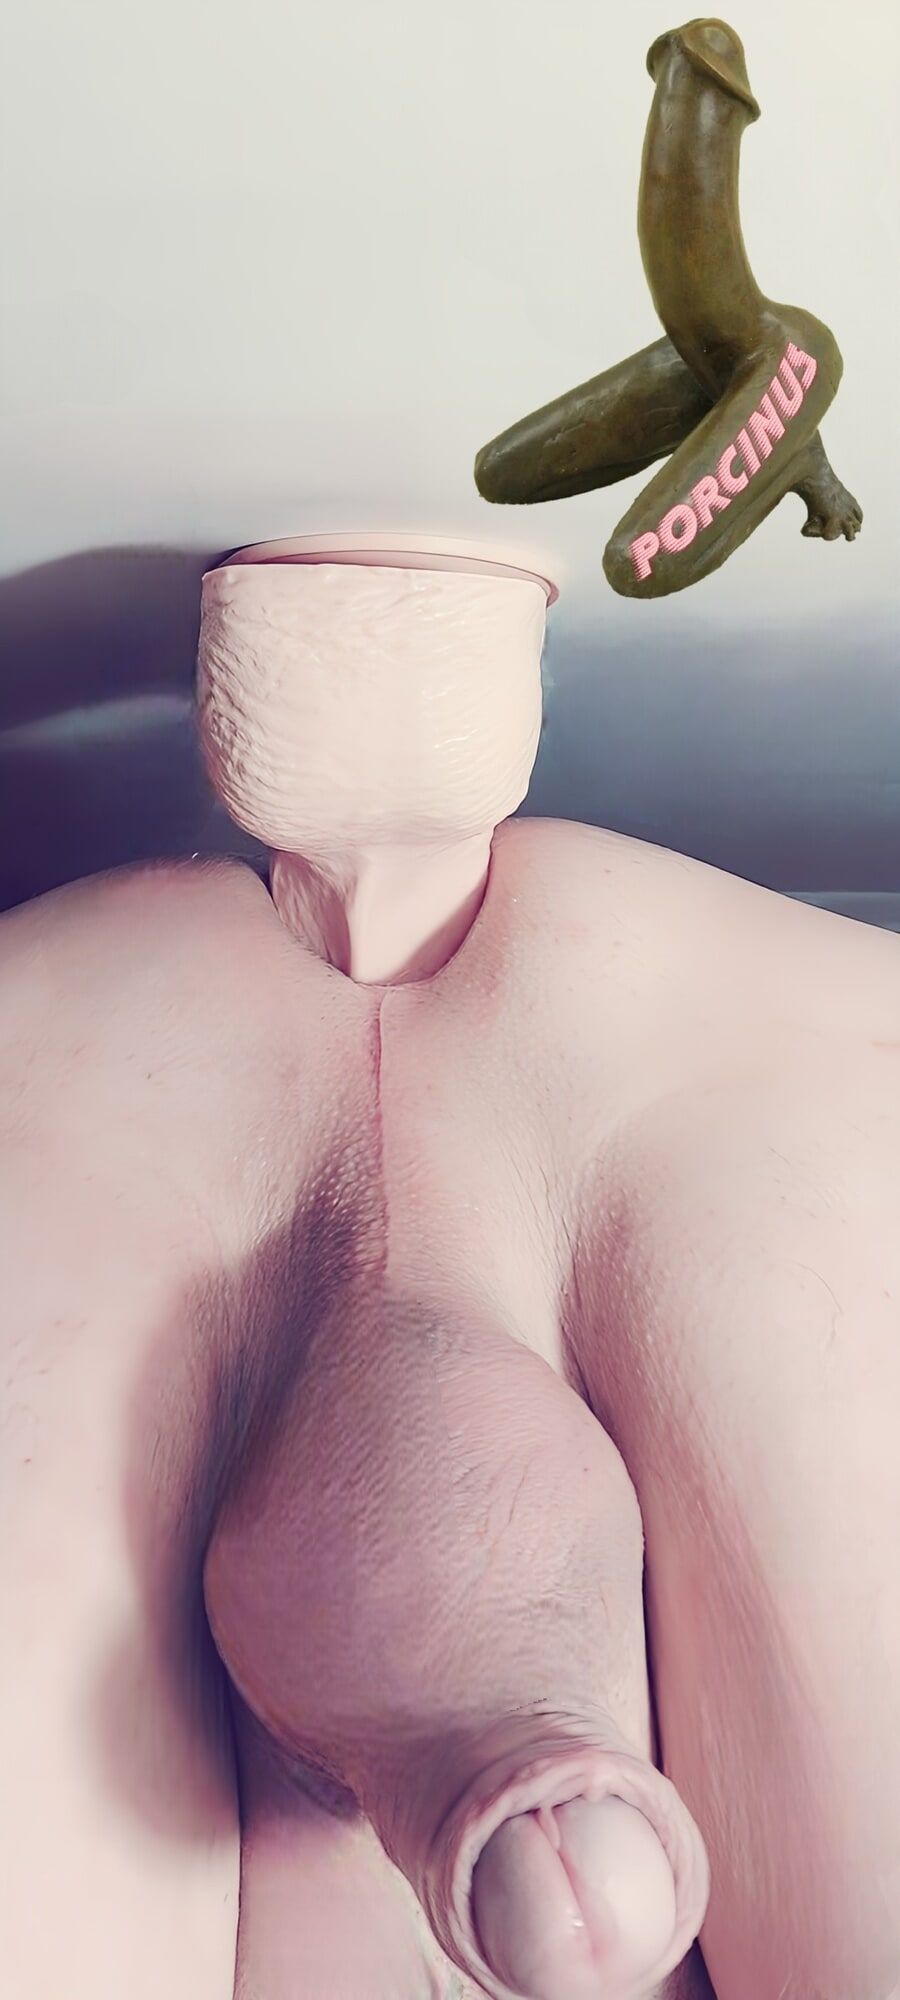 Fucking dildo anal solo butts 